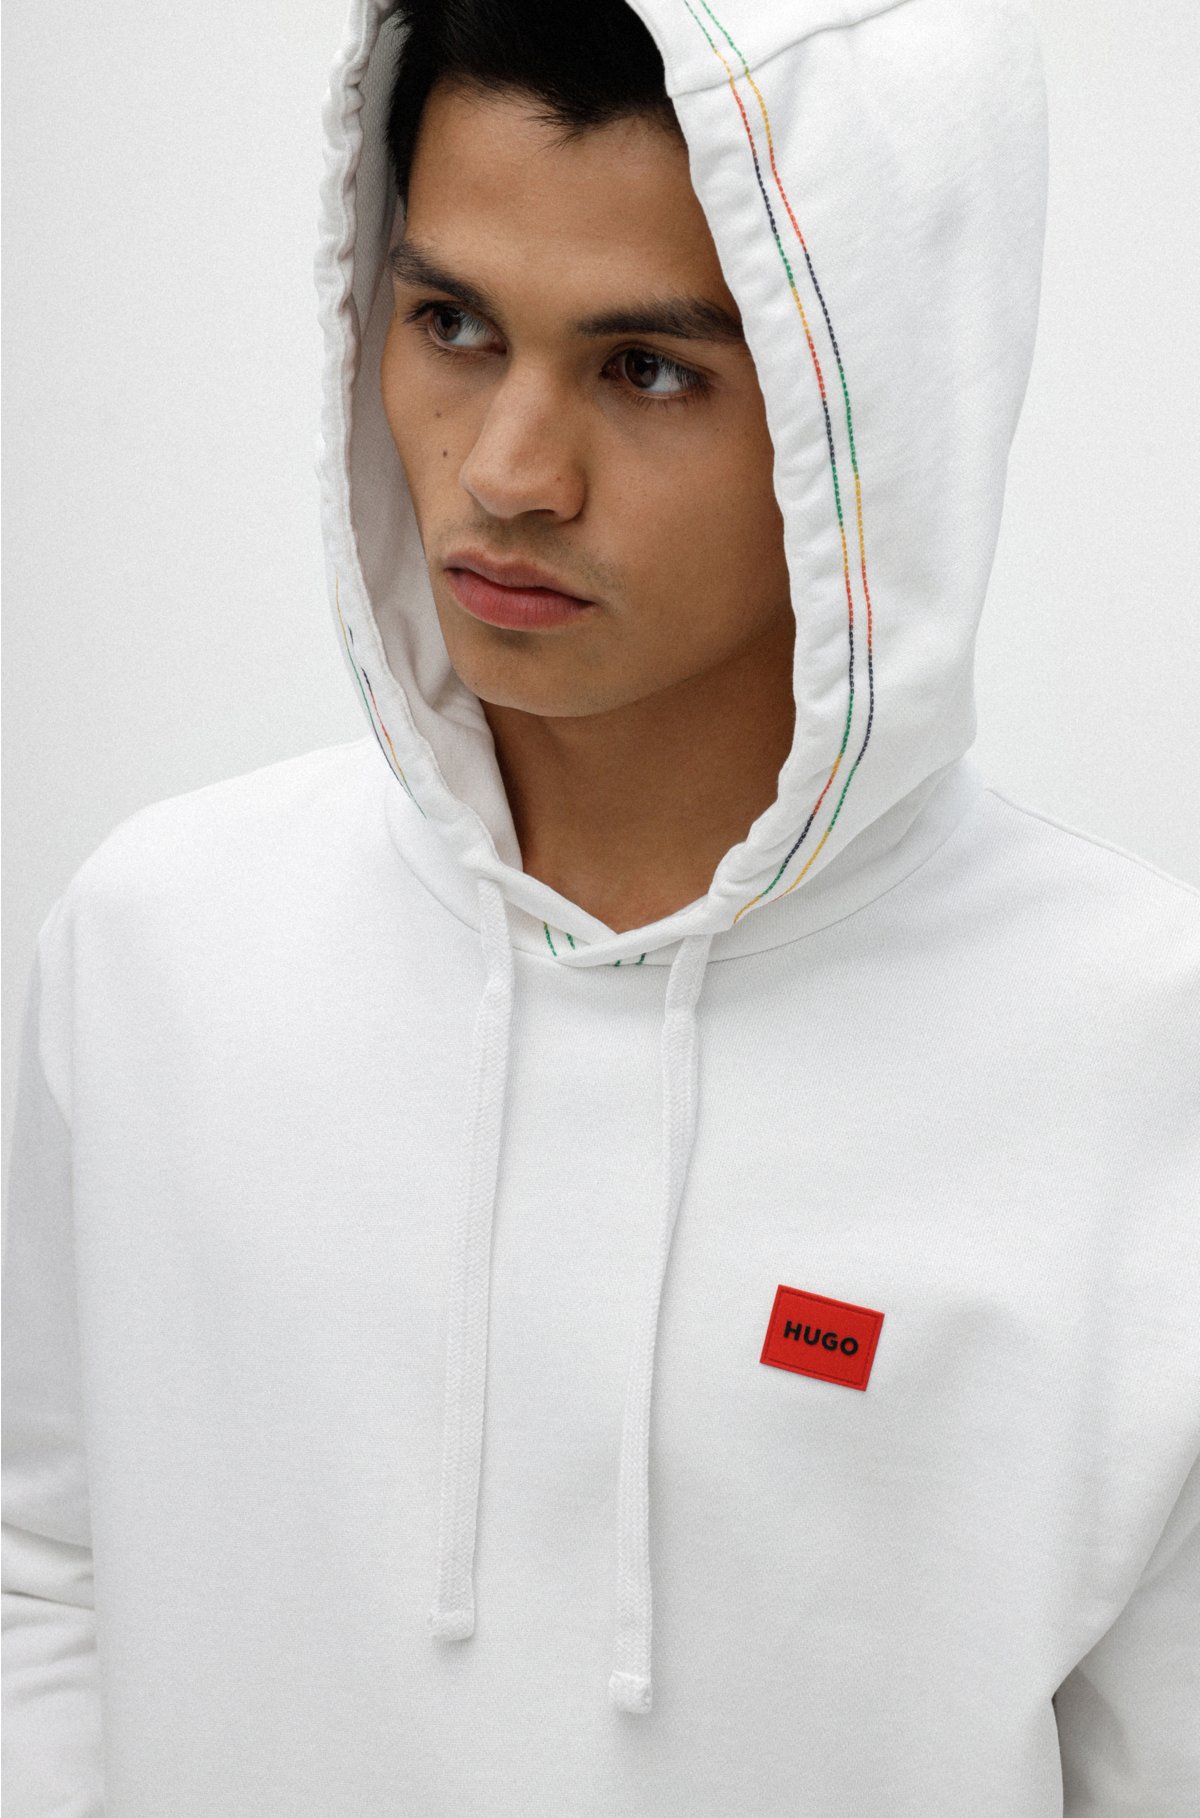 - in HUGO hoodie slogan multi-colored Relaxed-fit with cotton